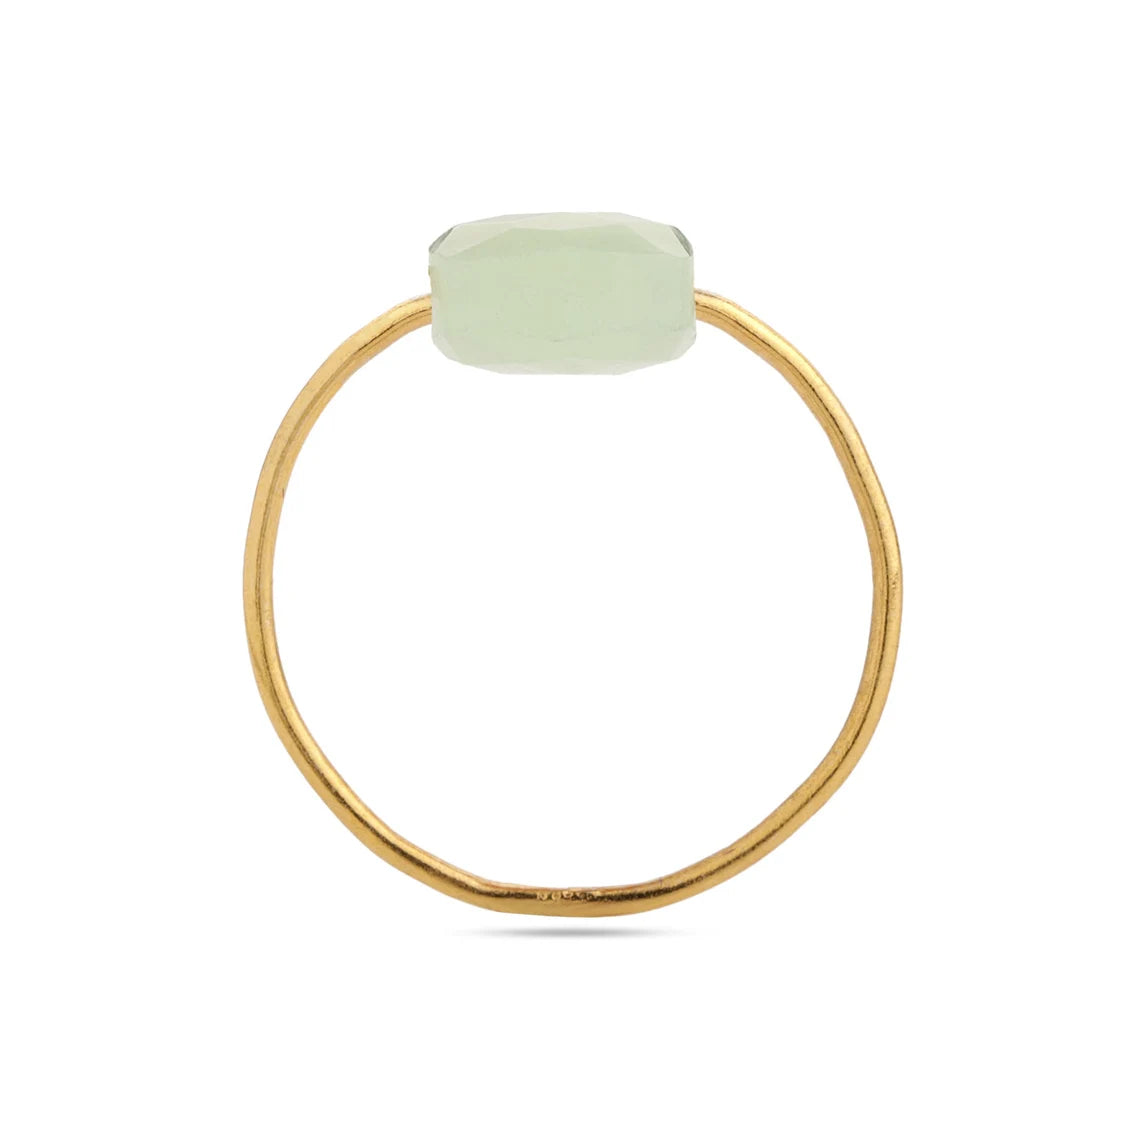 Gold Plating on 925 Sterling Silver Ring - Aqua Chalcedony Ring, Cushion Ring, Gold Ring, Stackable Ring, Aqua Chalcedony Gemstone Ring Handmade Ring